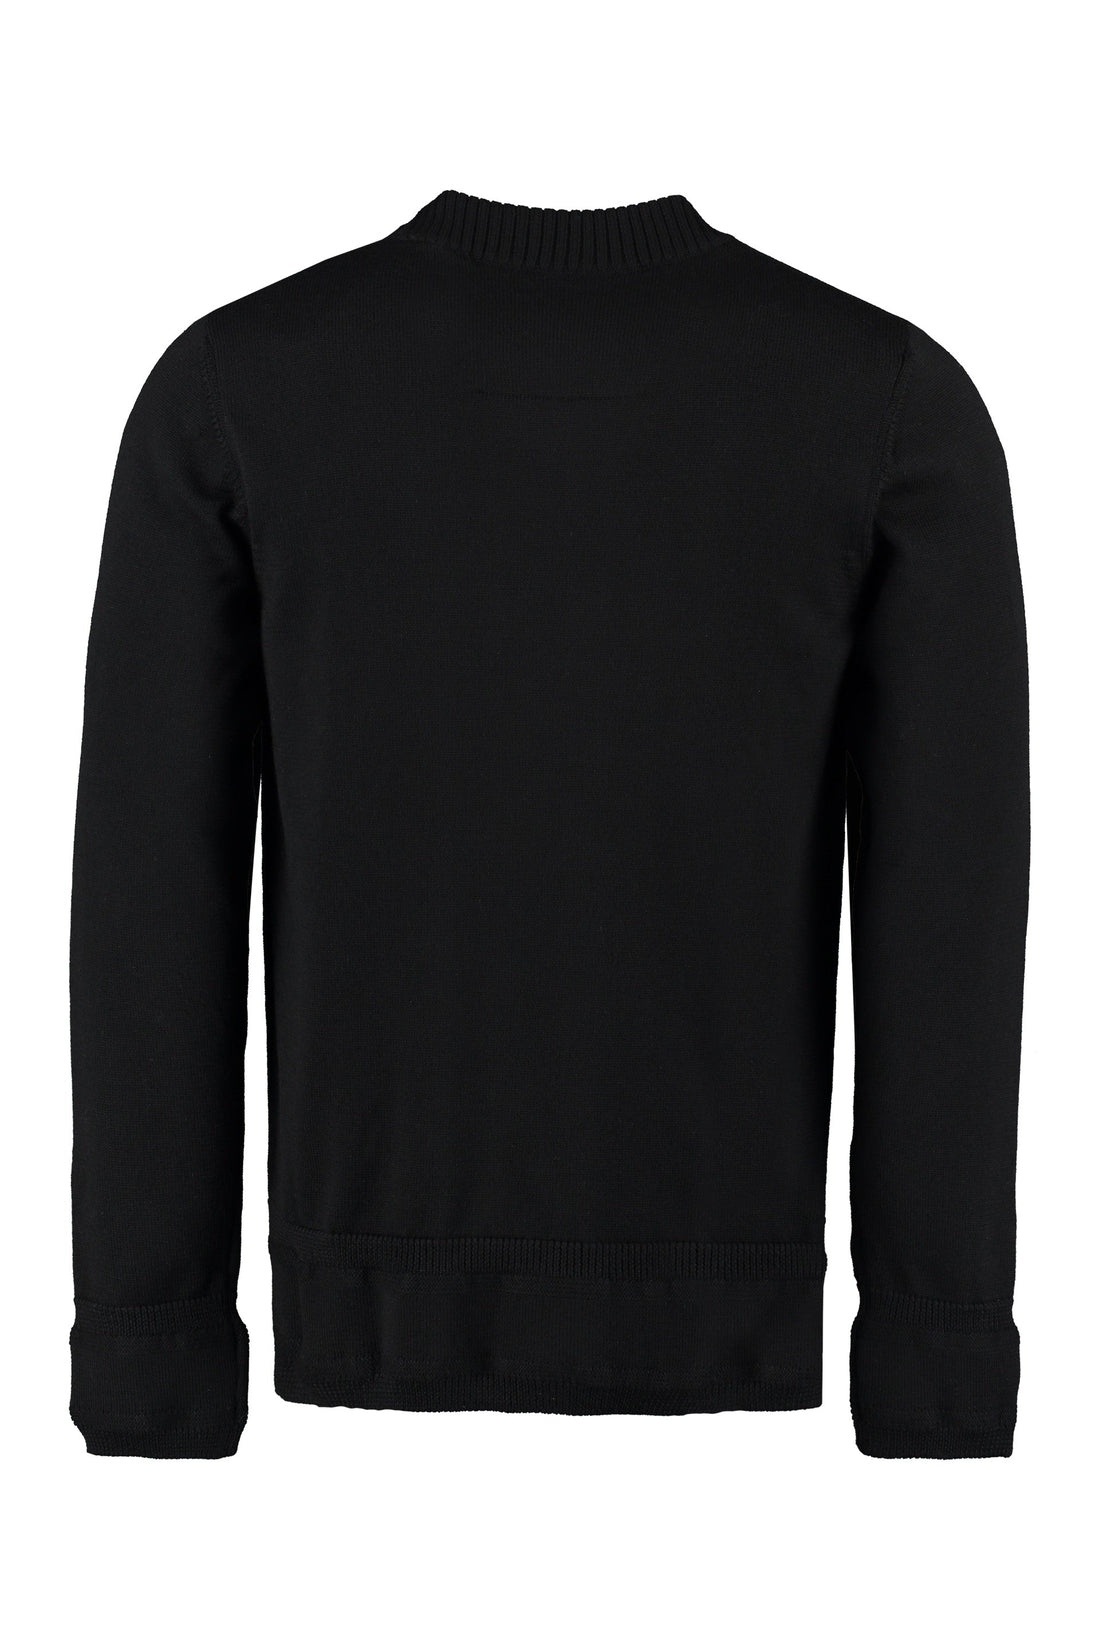 Givenchy-OUTLET-SALE-Crew-neck wool sweater-ARCHIVIST